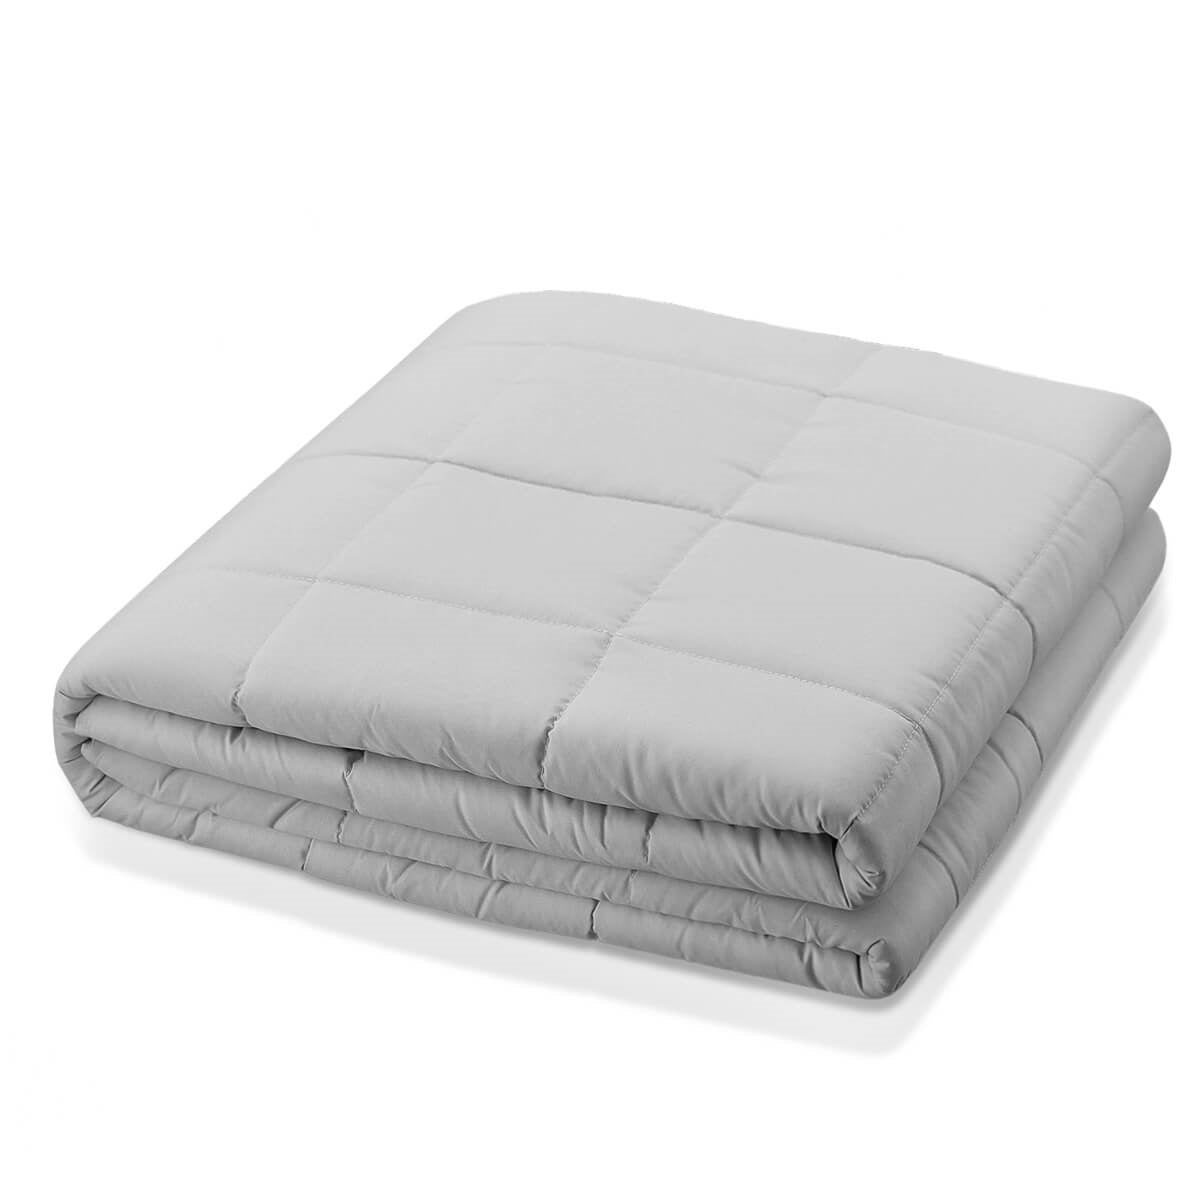 Quility Premium Weighted Blanket Review